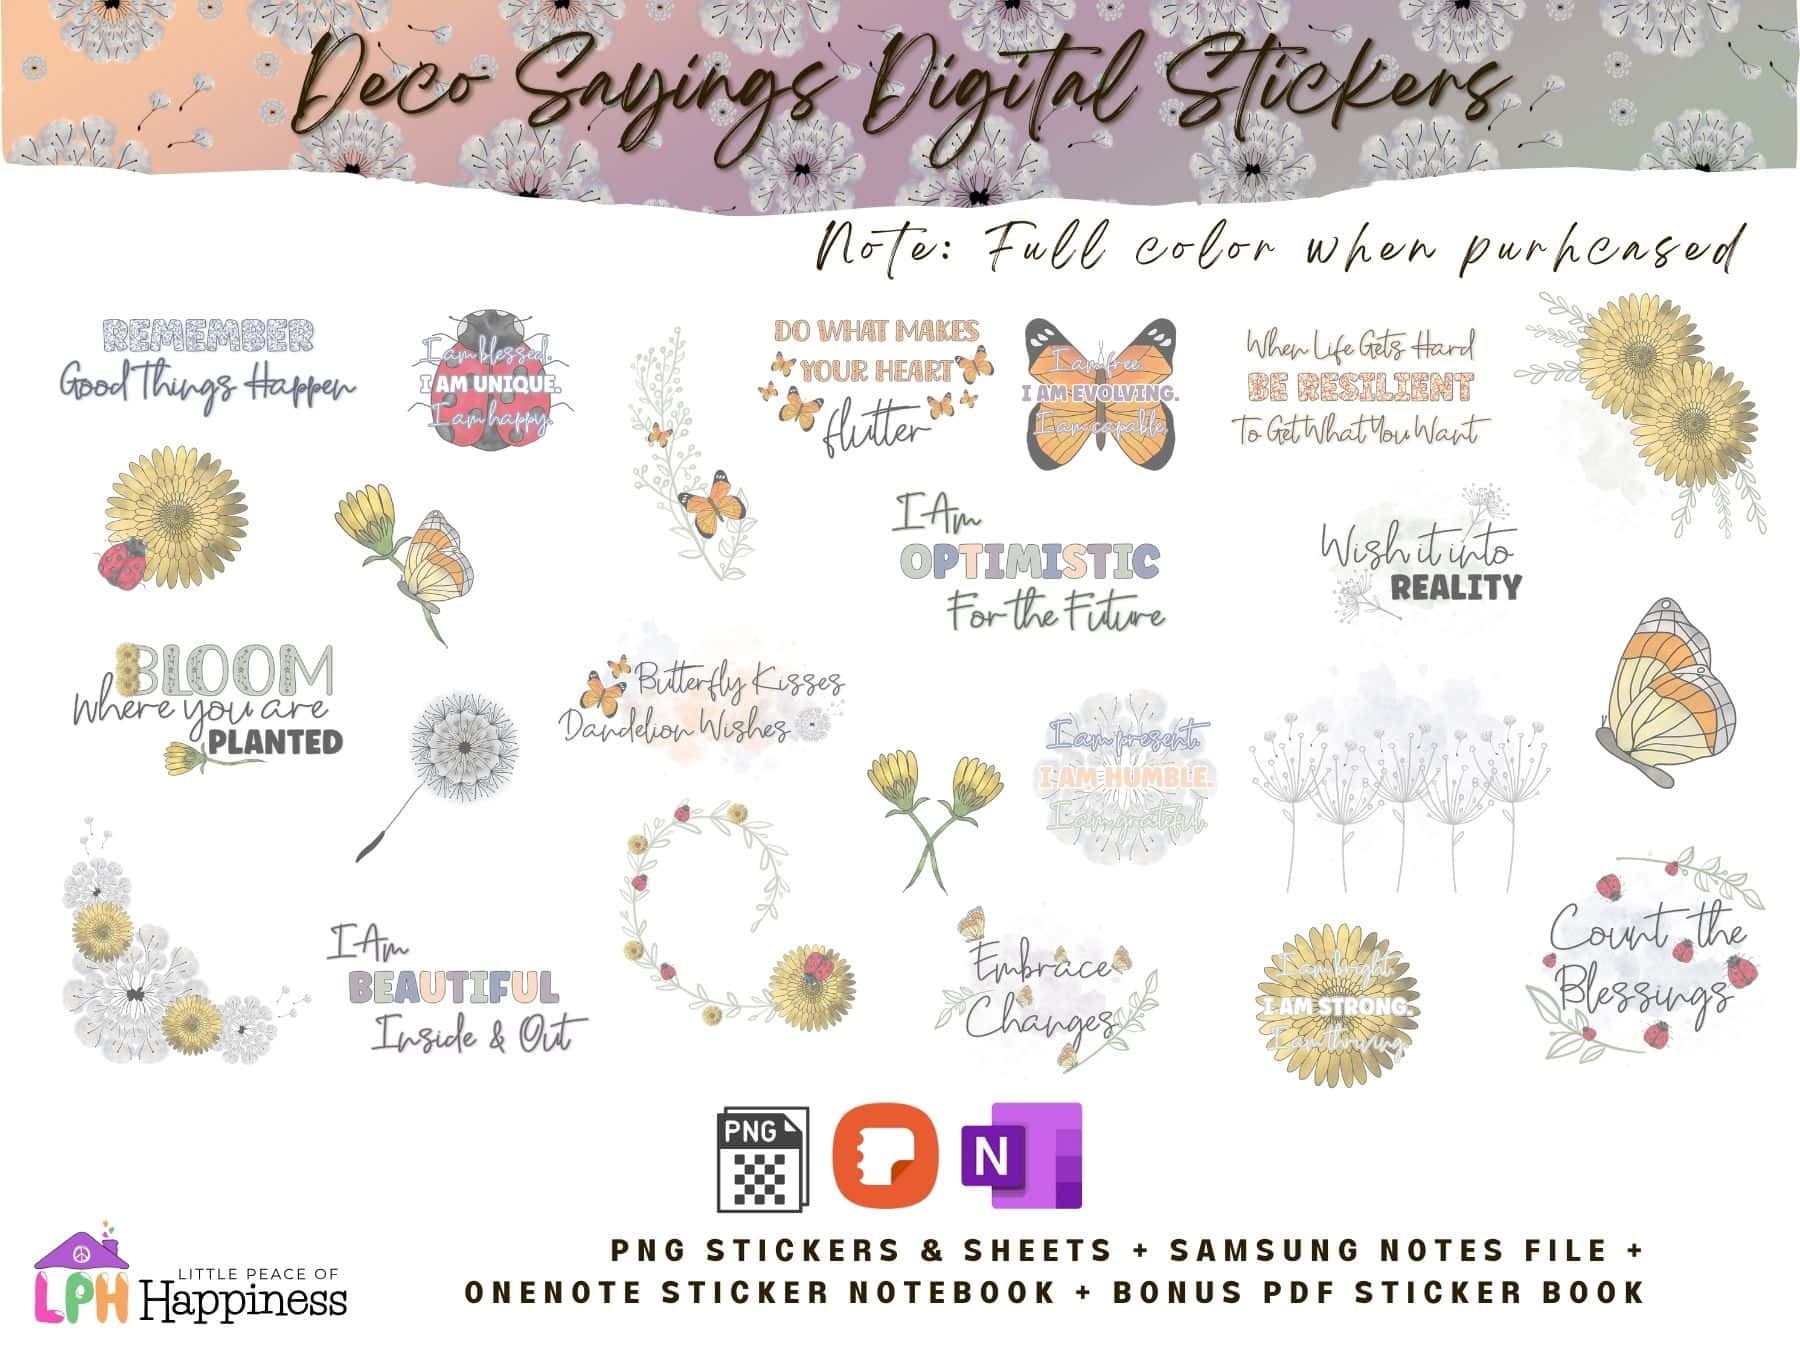 Aesthetic digital stickers with positive affirmations for digital planners. Spring deco motivational sayings for self-care & mental health wellness. Cottagecore stickers for therapy, anxiety, self-love journal. PNG, samsung notes, onenote planner.